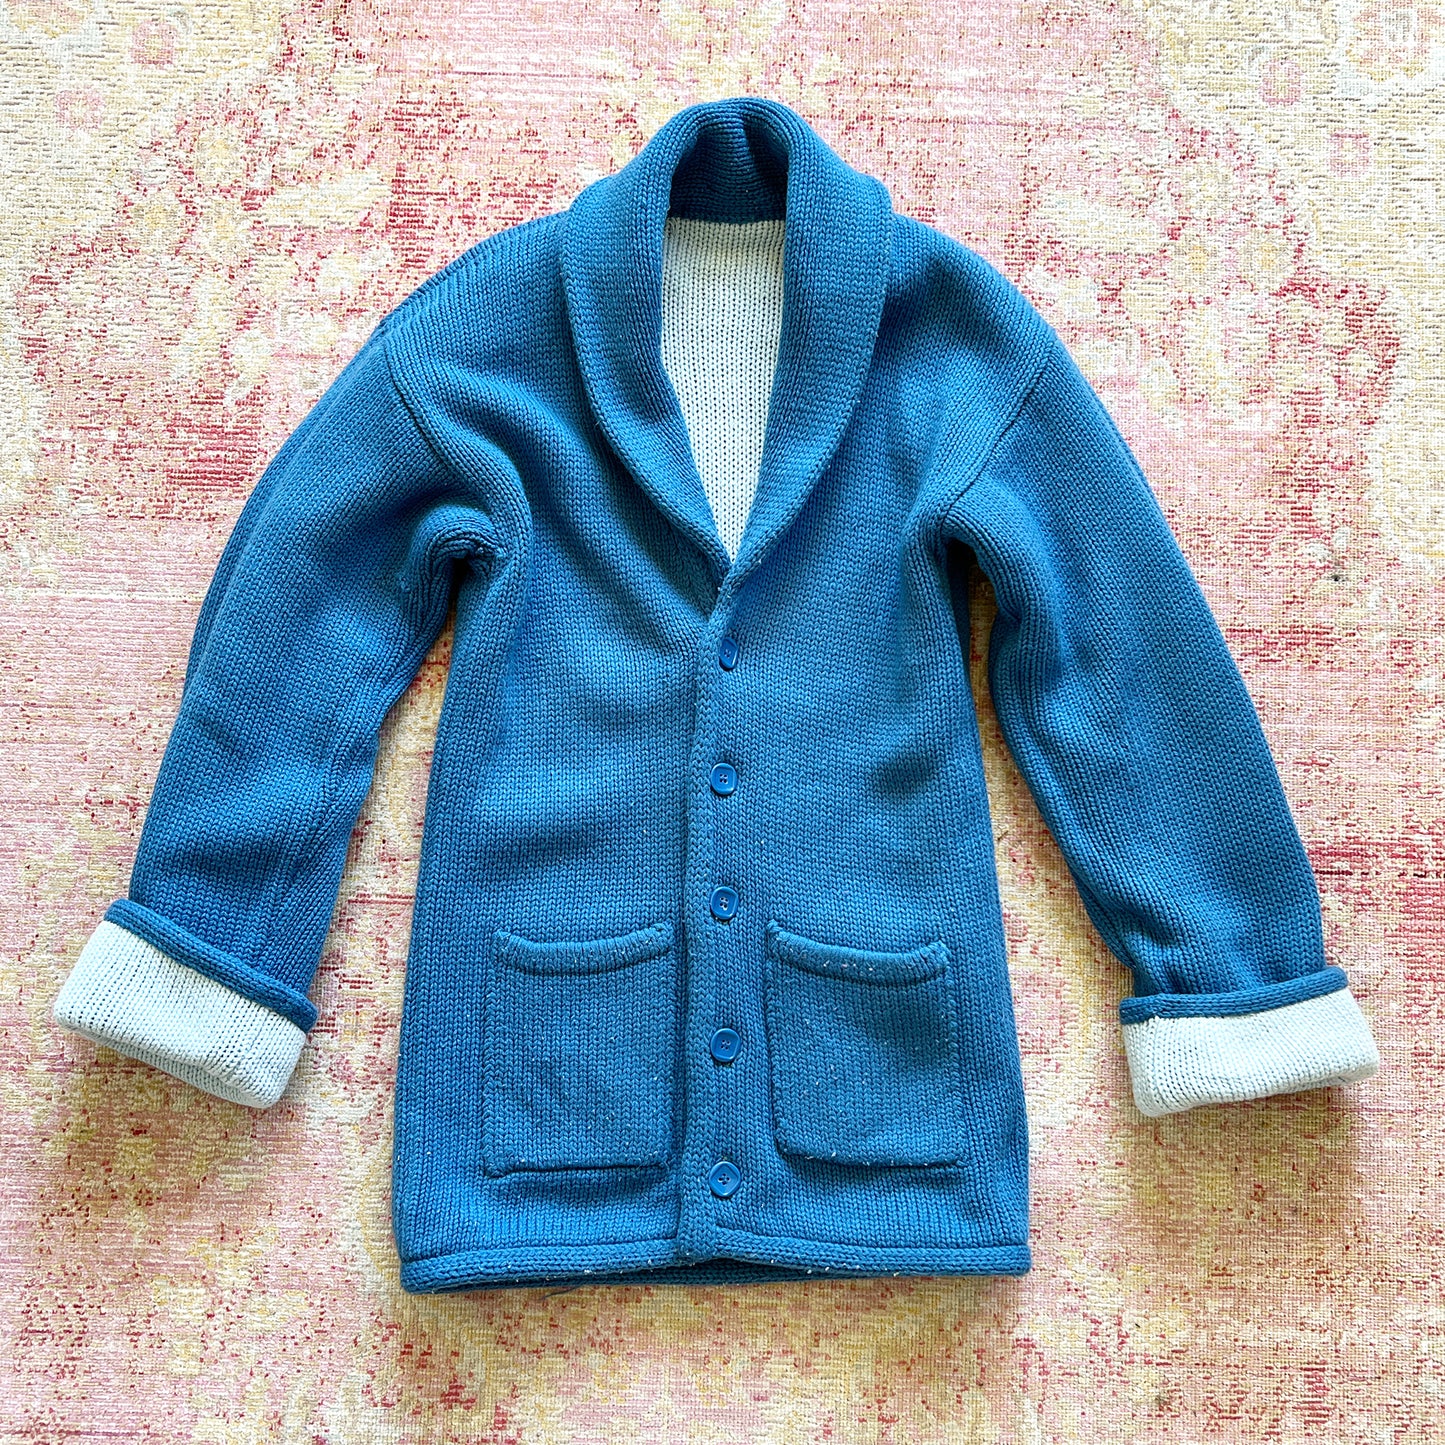 [AS-IS] 1970s Reversible Knit Cardigan | x-small/small